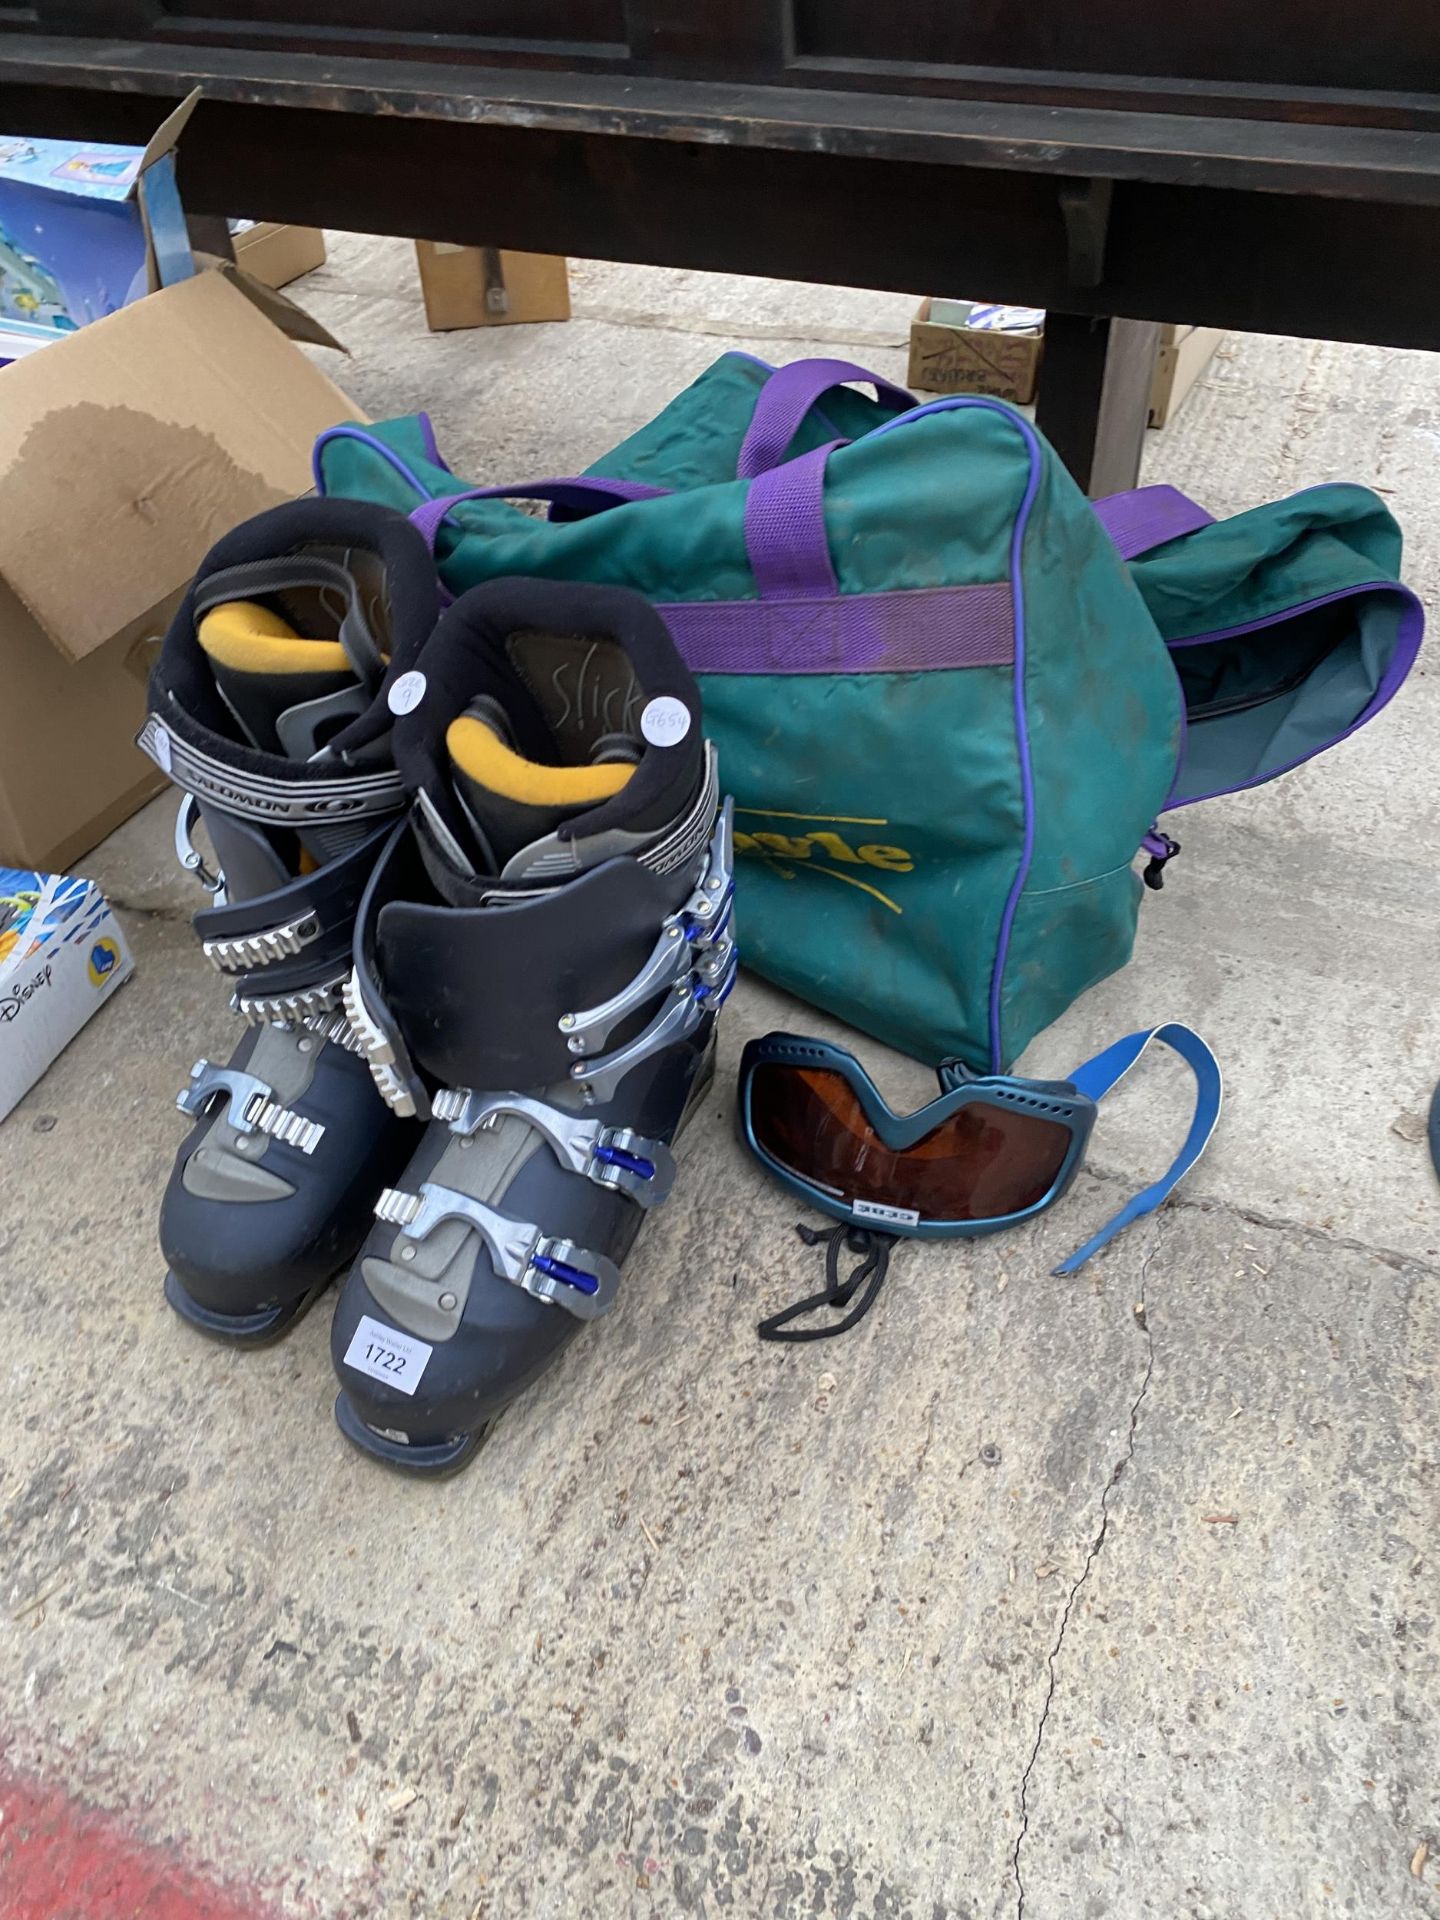 A PAIR OF SKI BOOTS AND A CARRY BAG